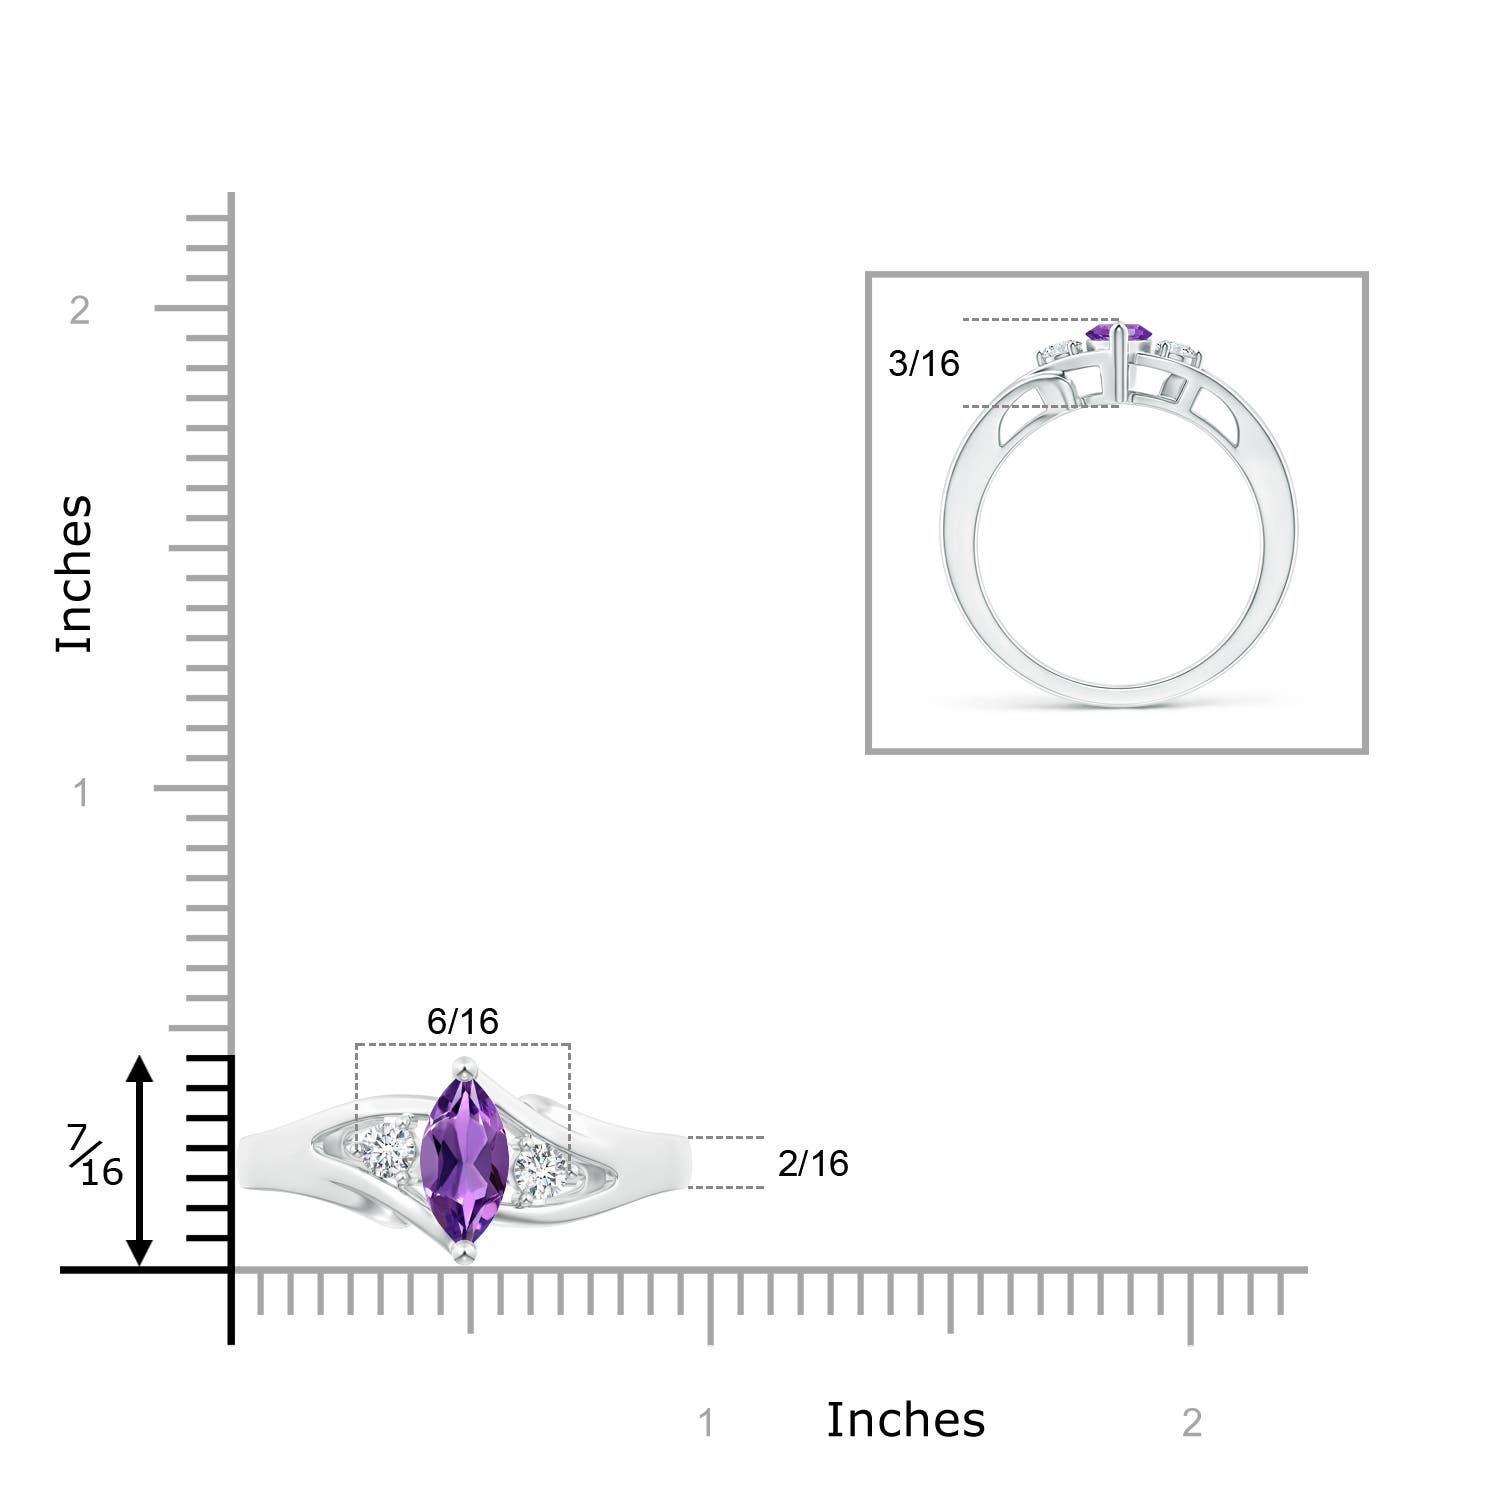 AAA - Amethyst / 0.64 CT / 14 KT White Gold